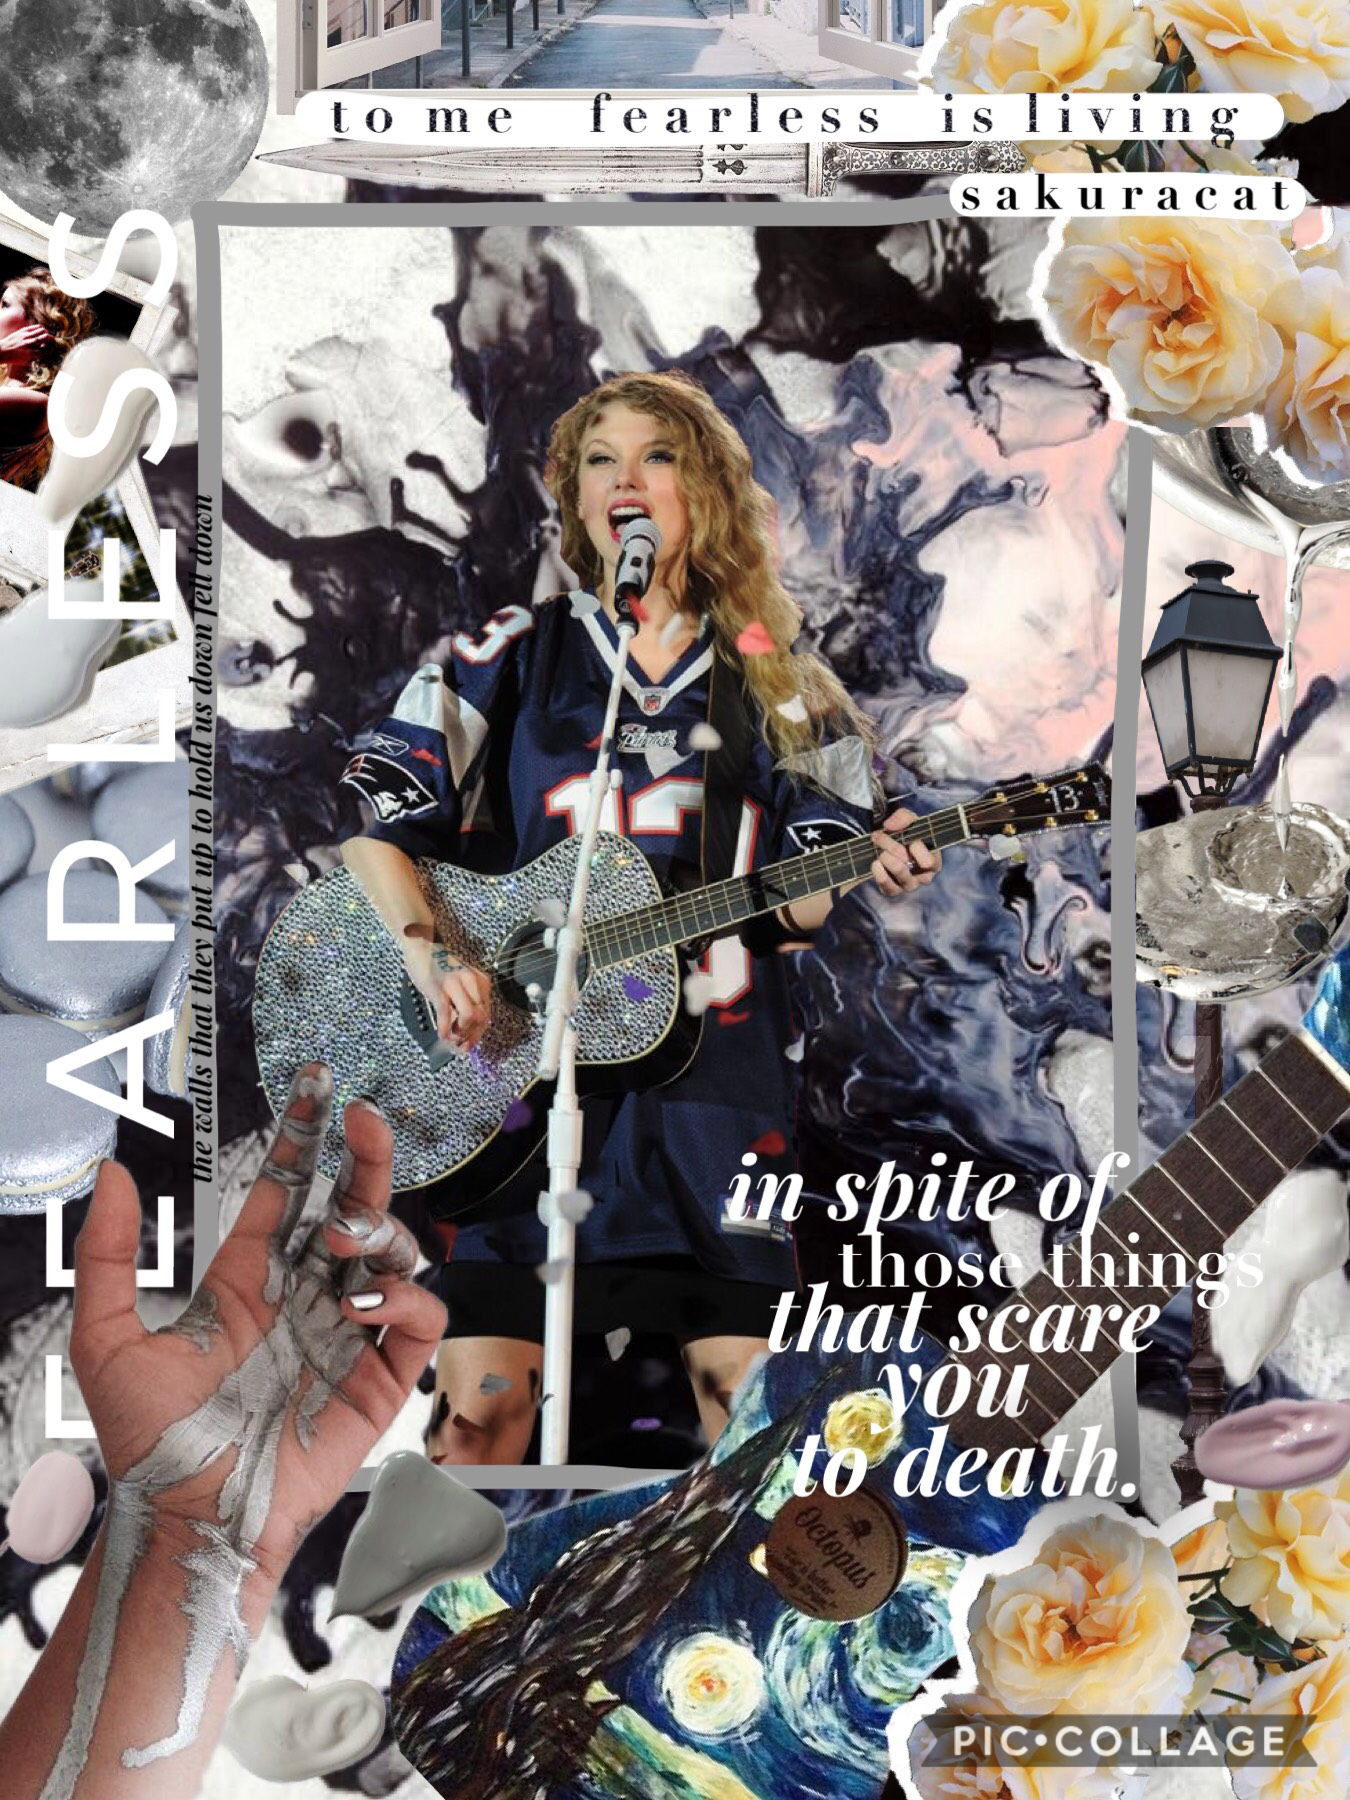 I’M SORRY FOR ALL THE TAYLOR COLLAGES LOL TAP

IT’S FOR A GAMES
I SORTA LIKE THIS CURRENT STYLE SO I’LL DO THAT
QOTD: if you had a username change what would it be? AOTD: @StumbleOnHomeToMyCats, I already have an acc under that username I MADE UP THIS NAM